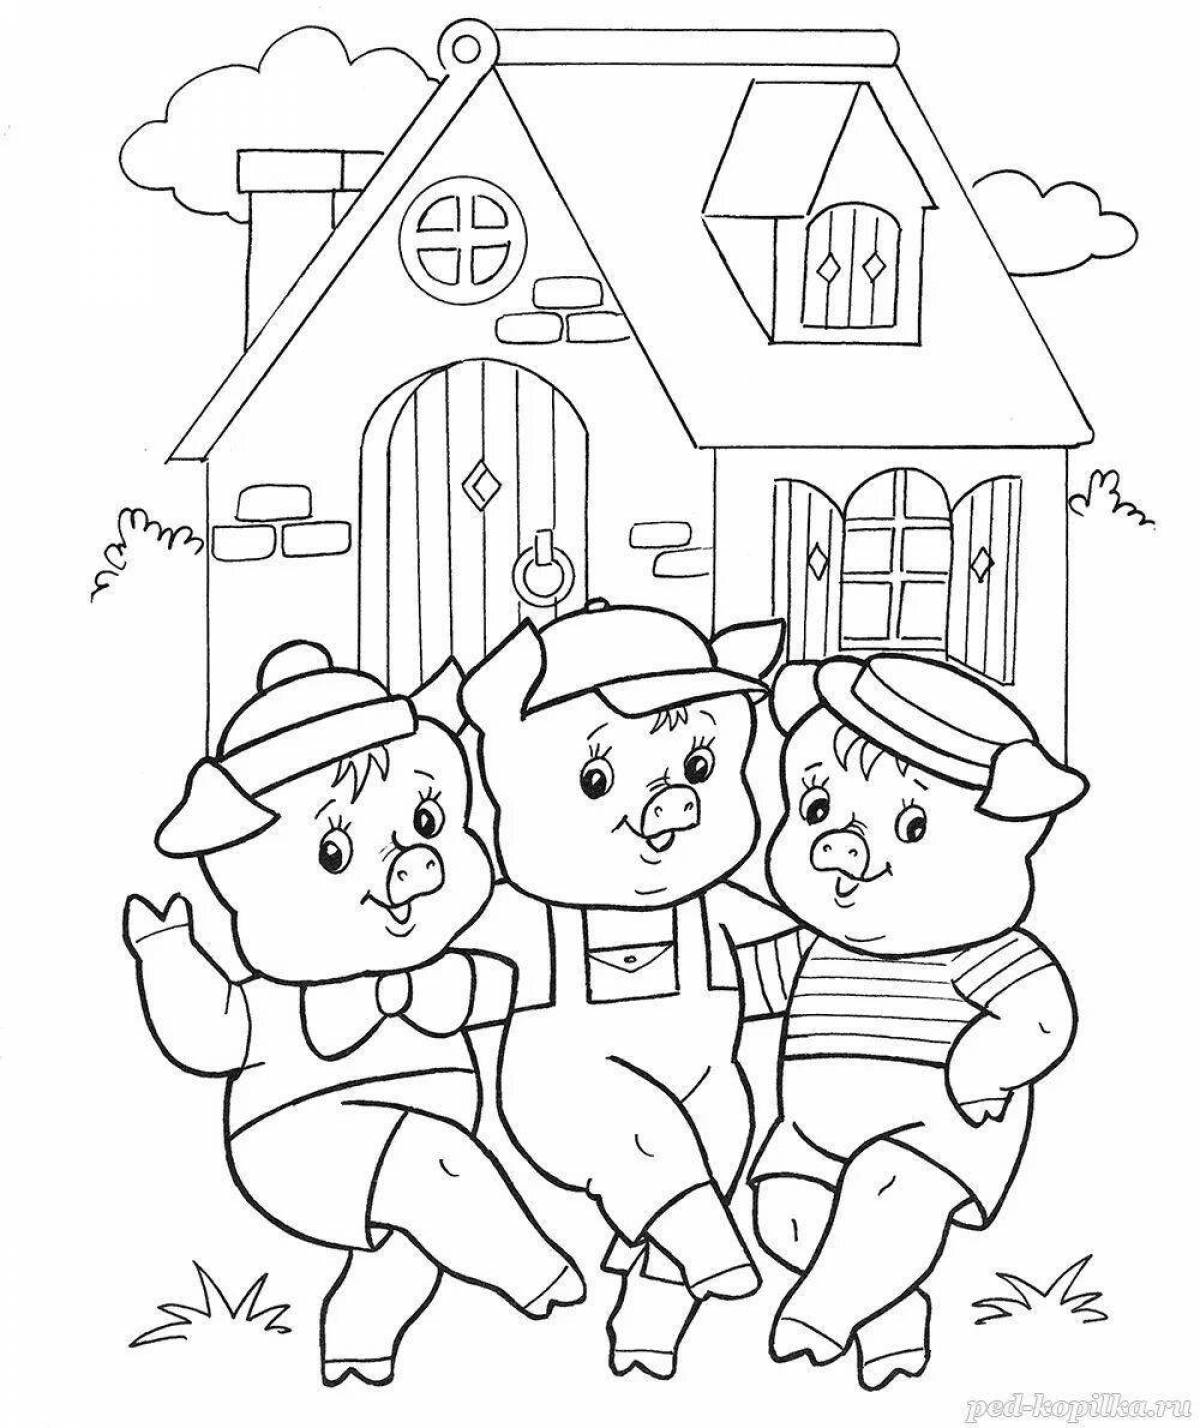 Playful three little pigs with houses